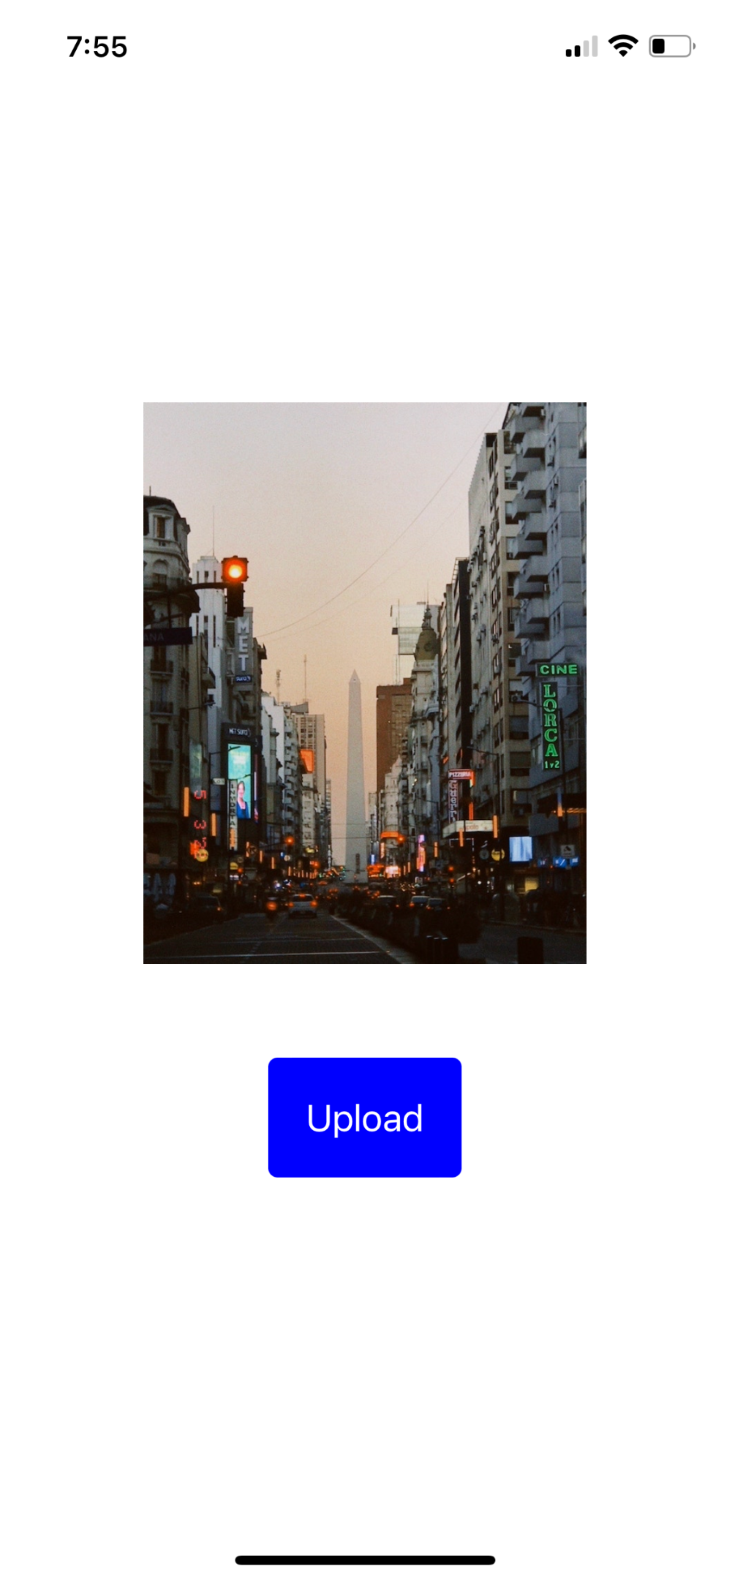 Upload Button with Photo